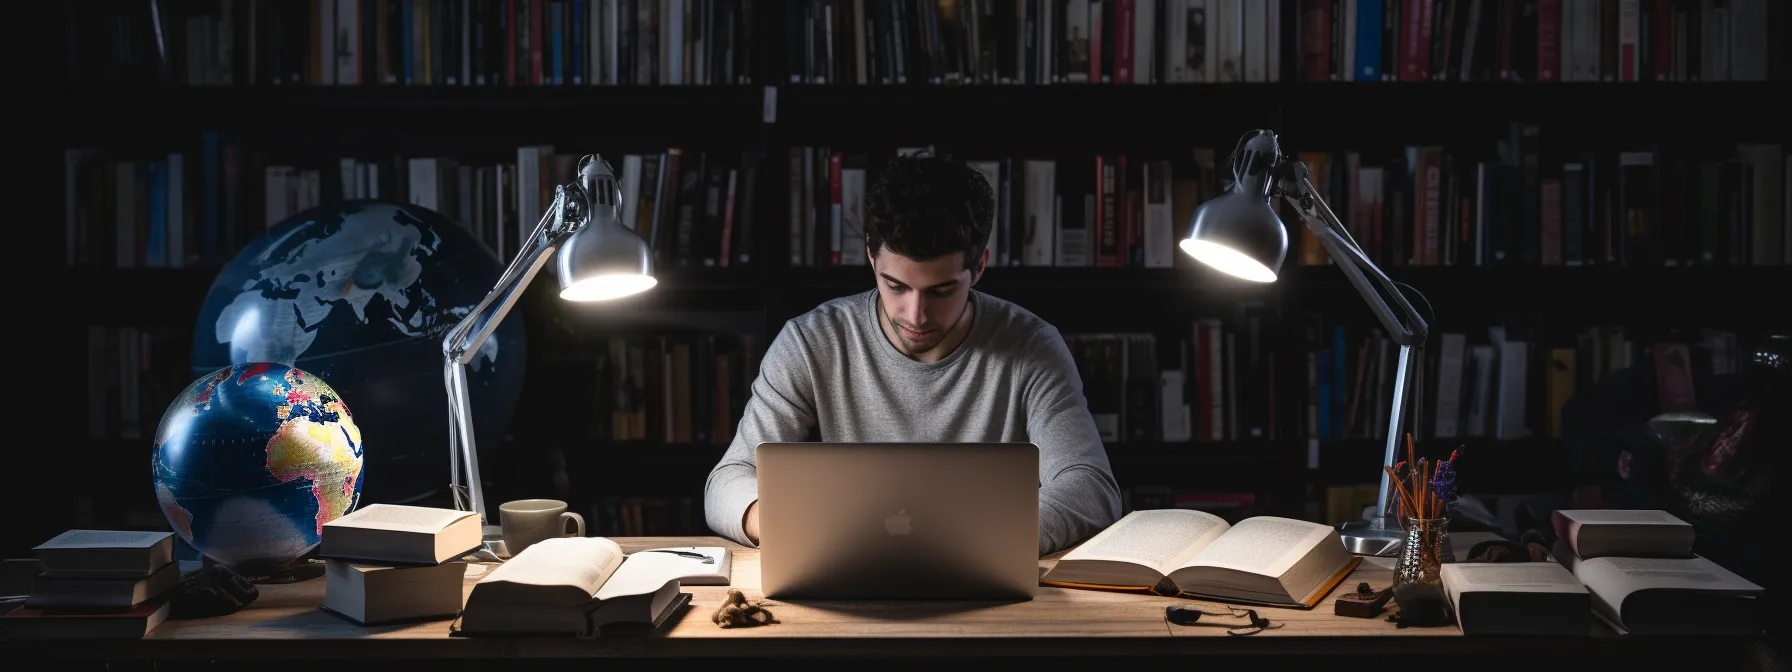 a person studying keyword research and optimization techniques with seotheory materials, surrounded by books and a laptop.